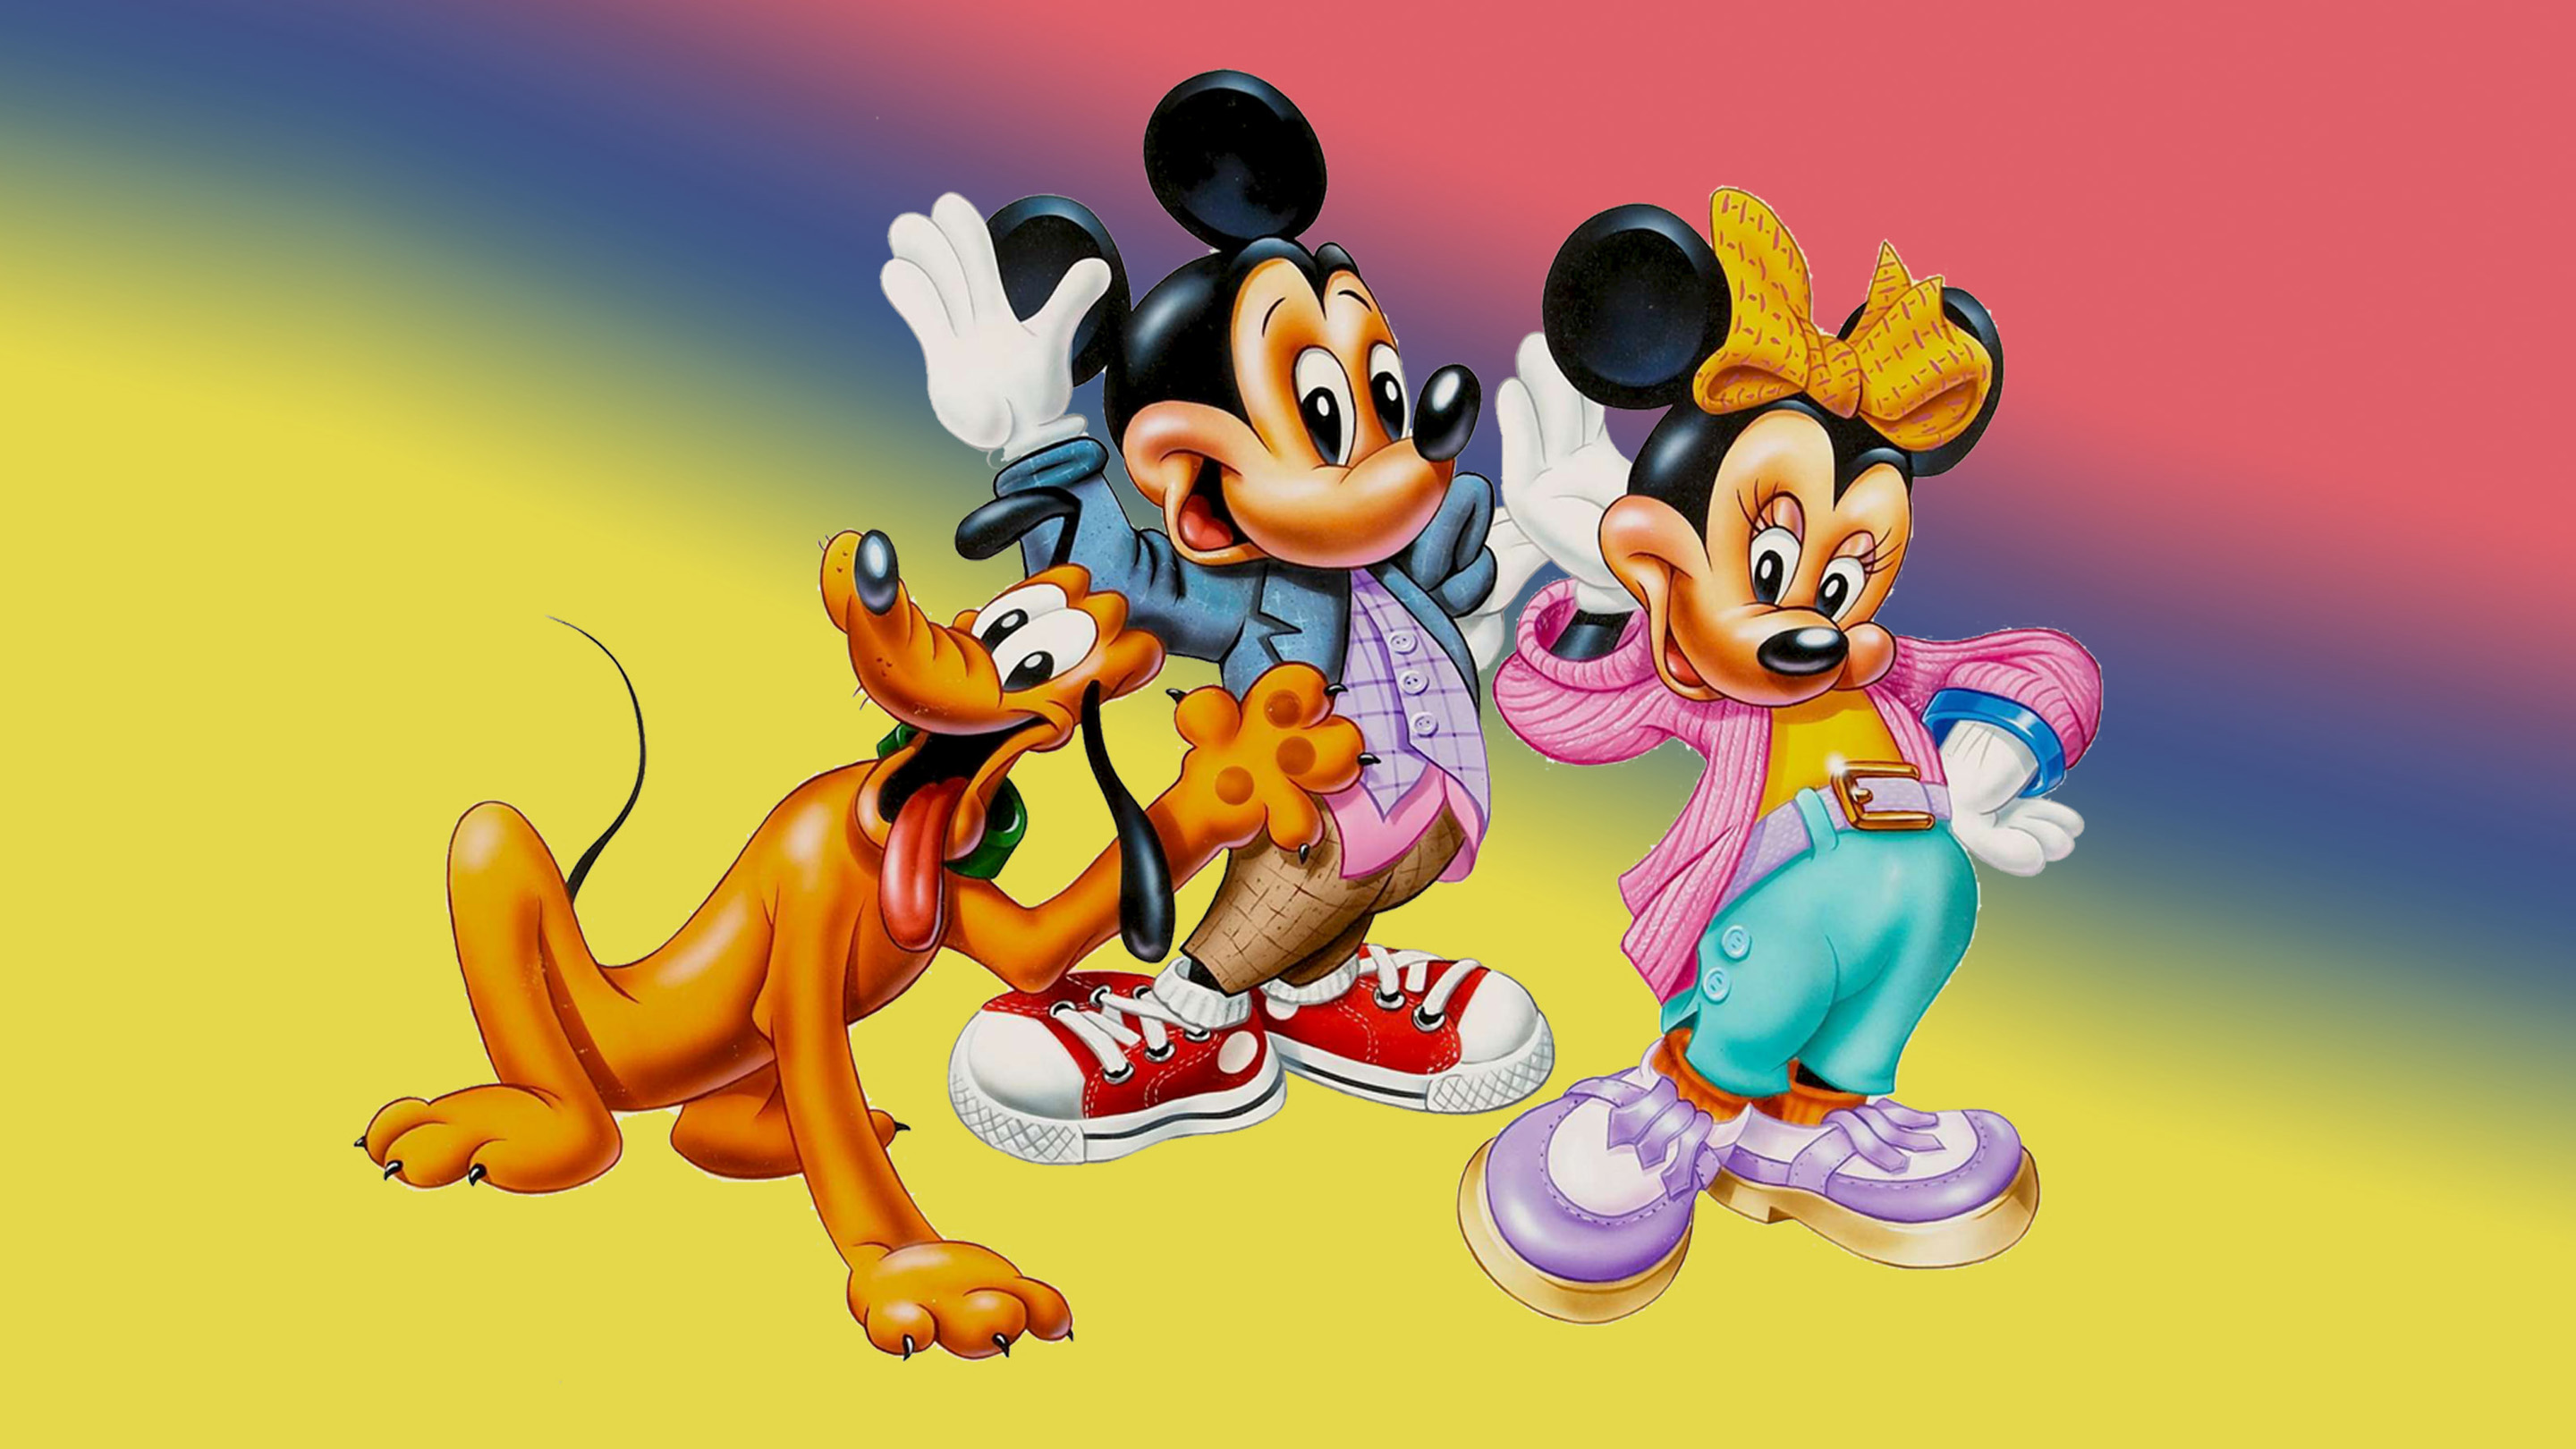 Mickey Mouse Minnie Mouse Donald Duck Goofy - HD Wallpaper 